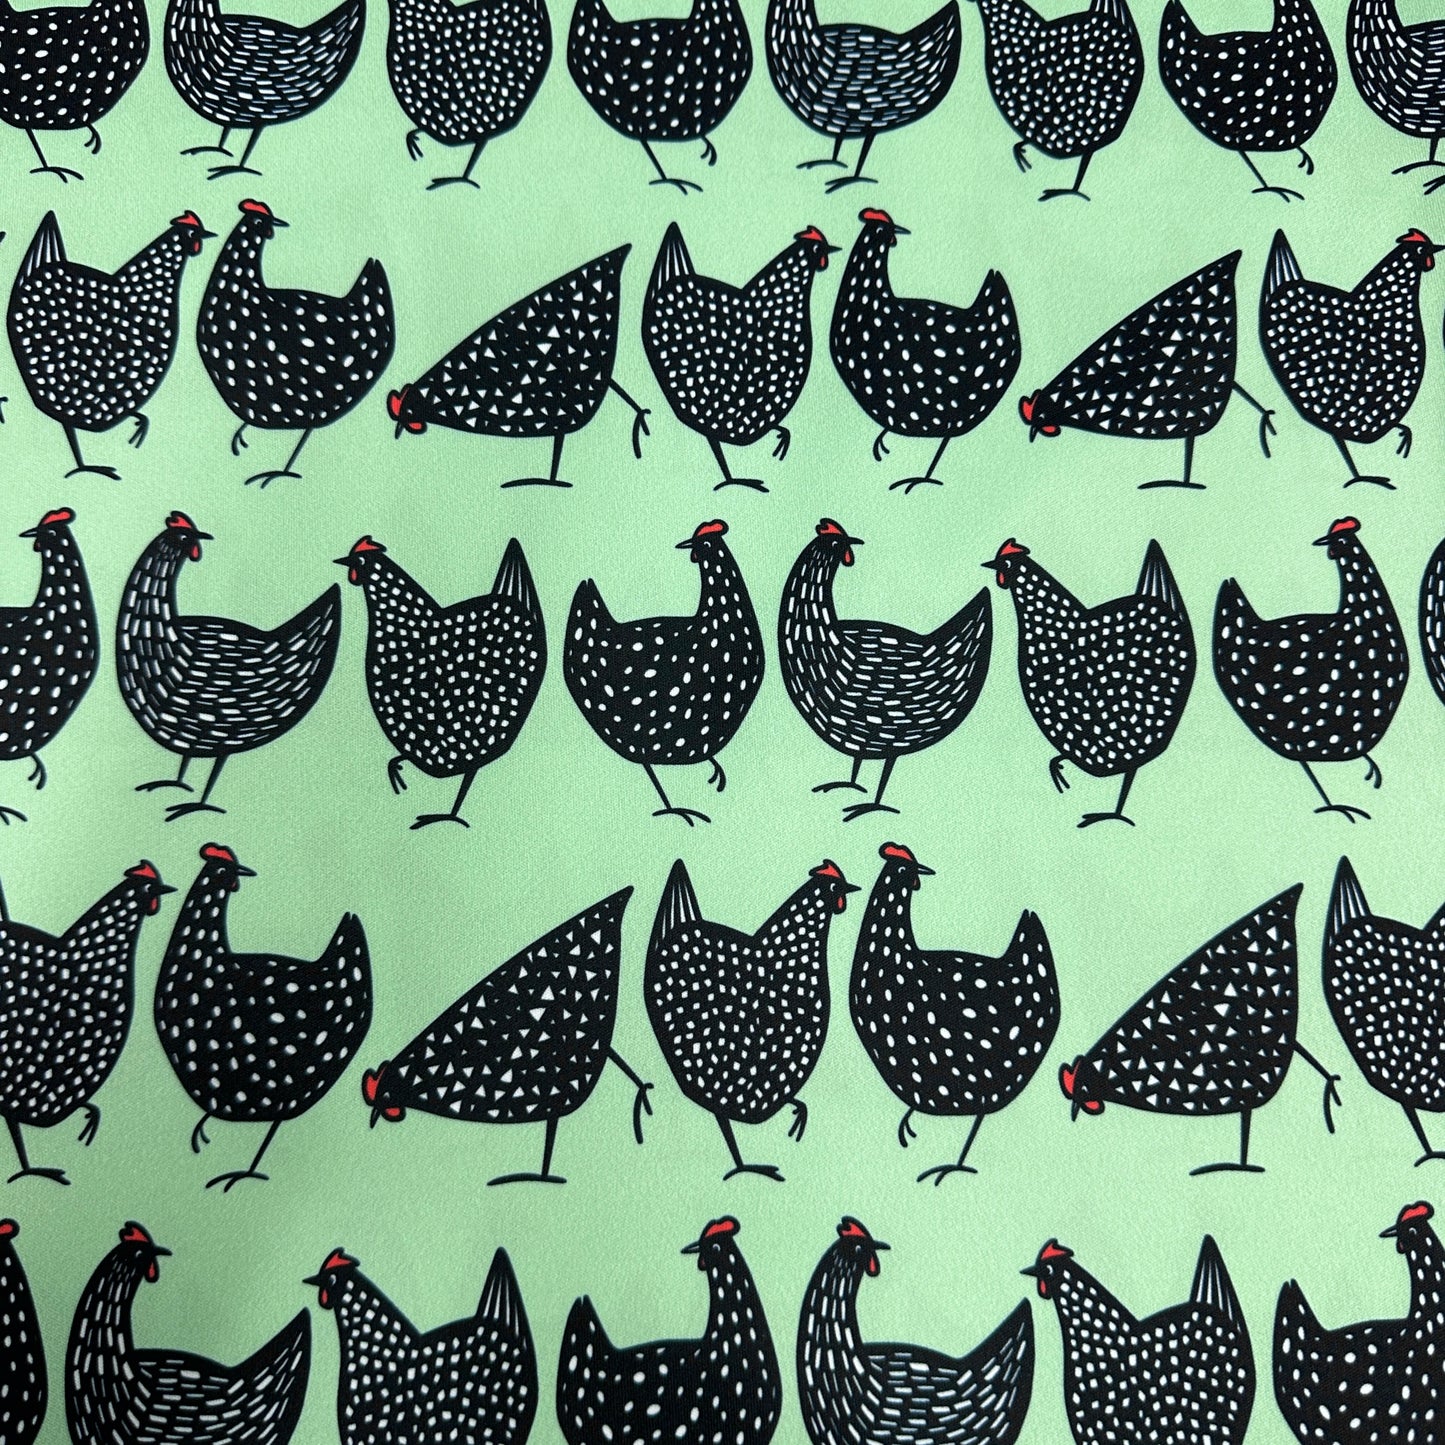 Black Chickens on Green 1 mil PUL Fabric - Made in the USA